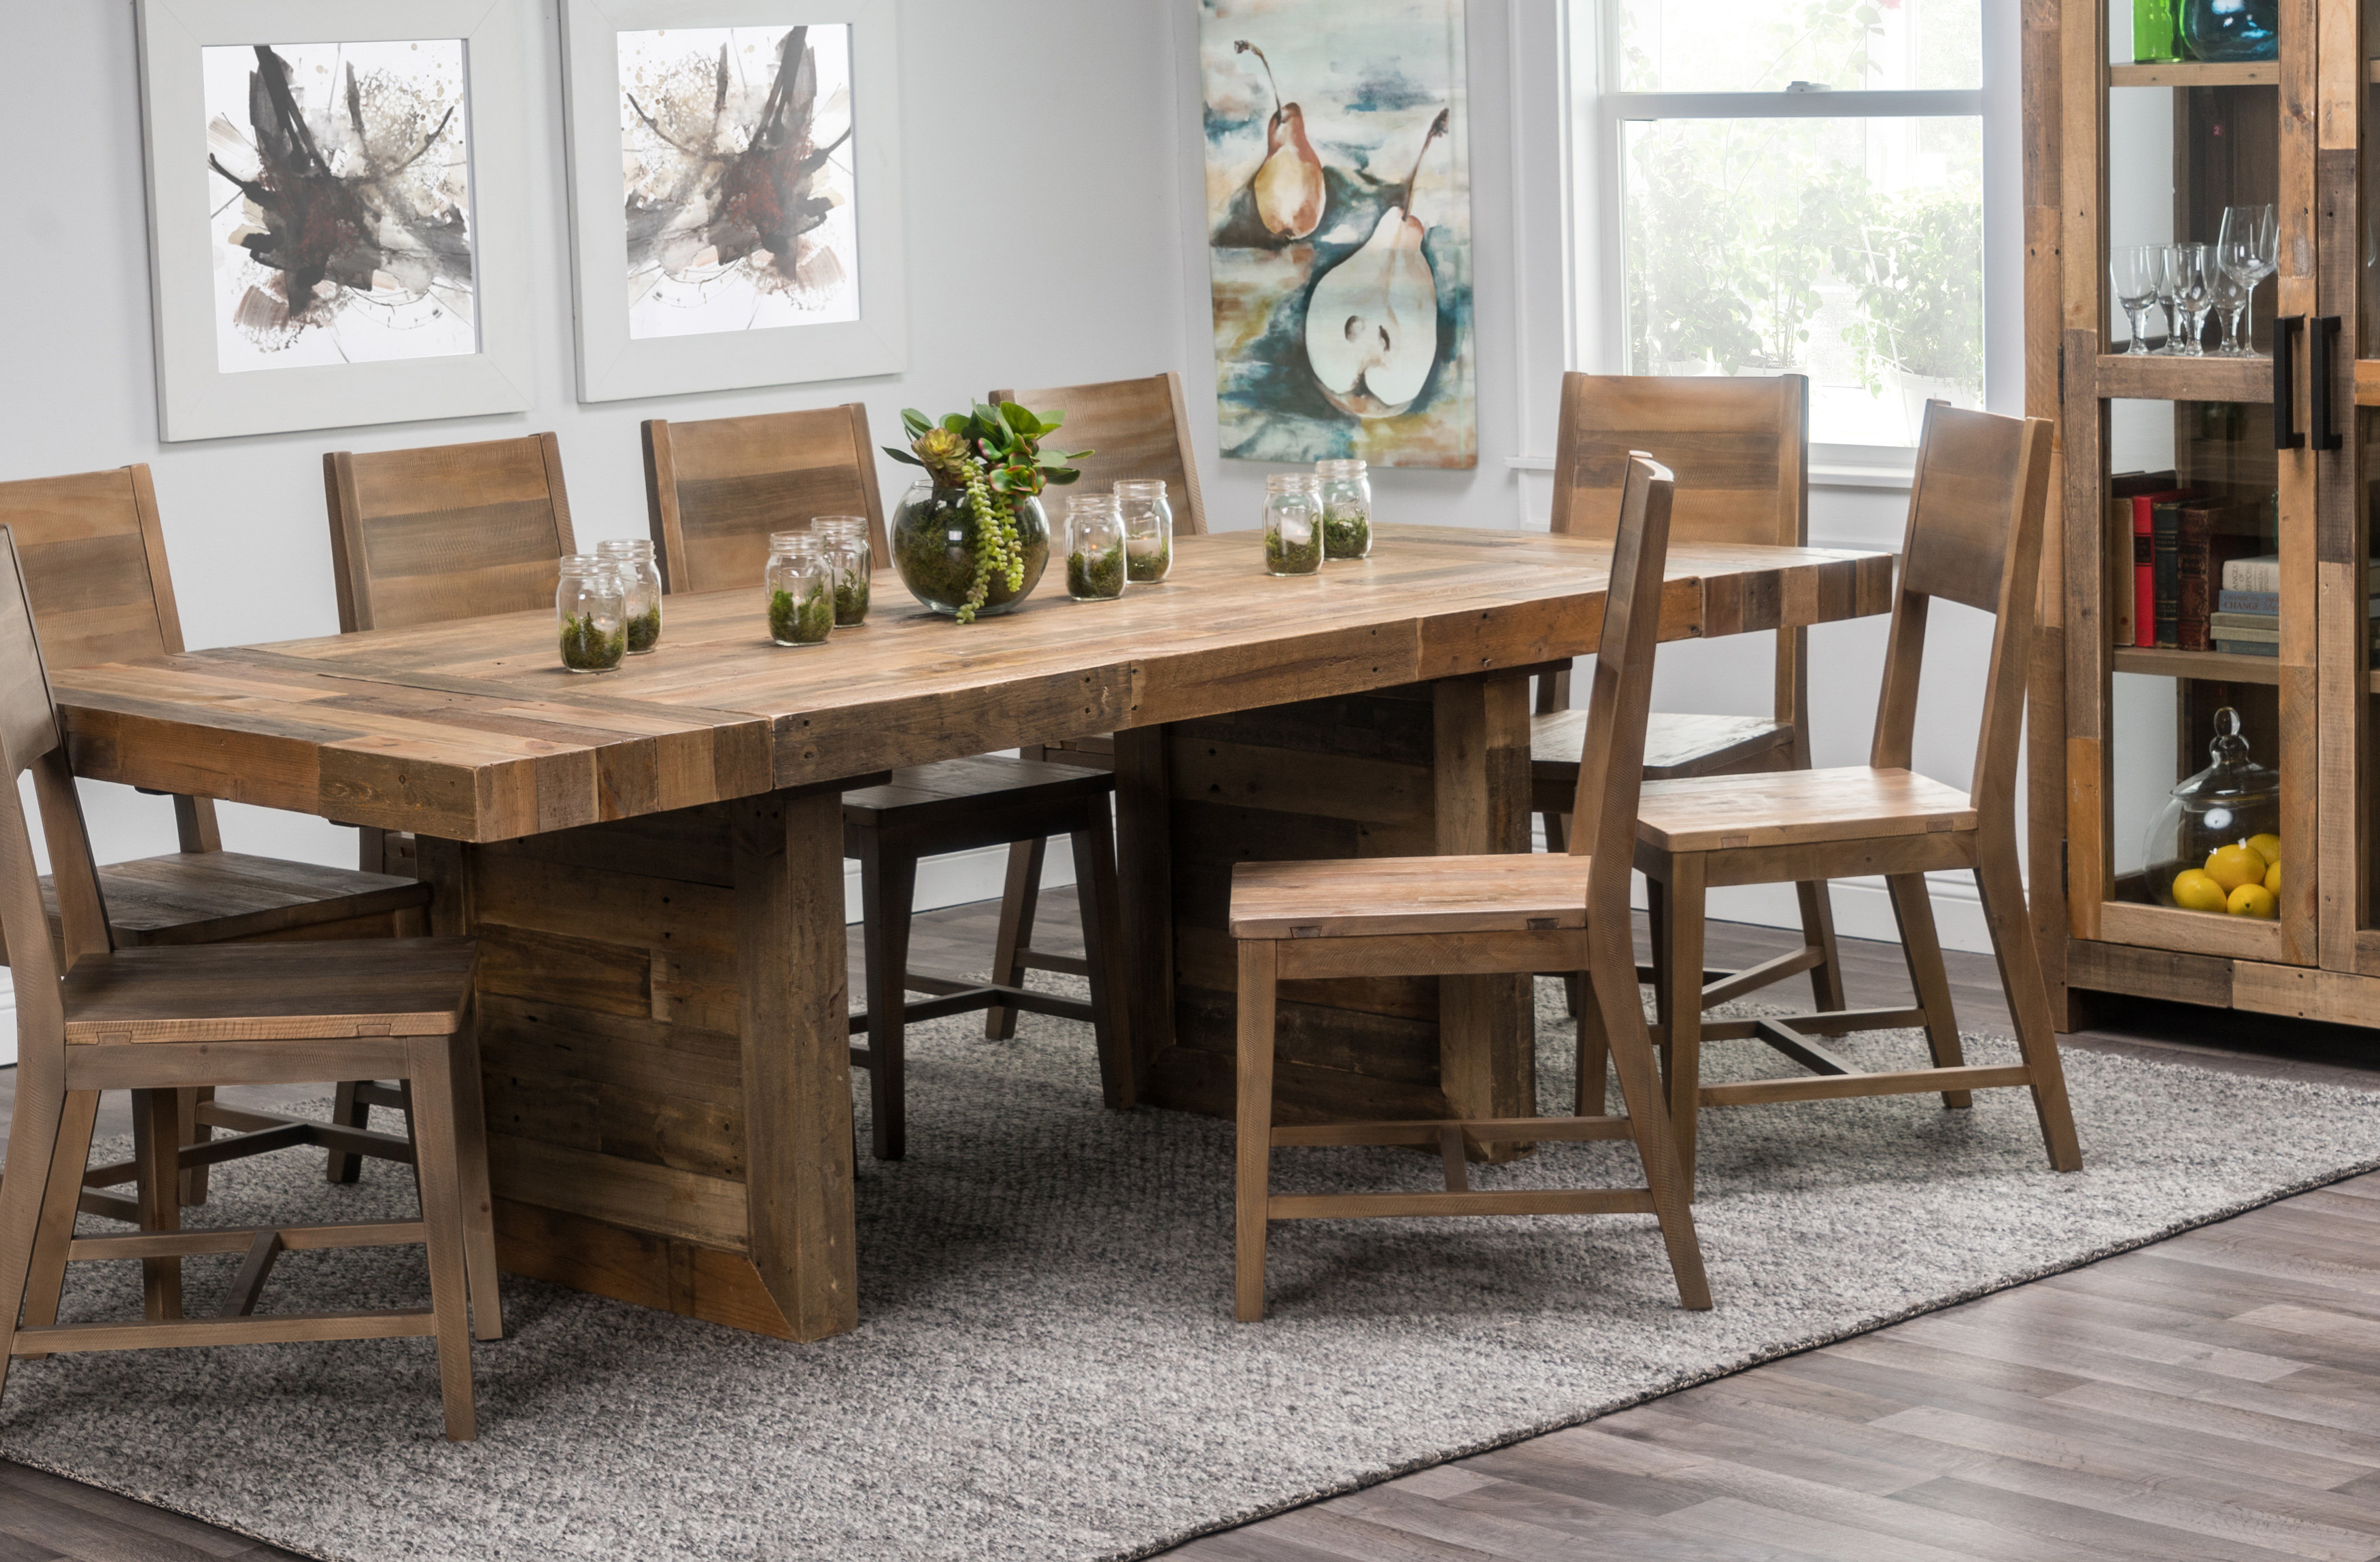 Solid Wood Dining Room Tables South Africa